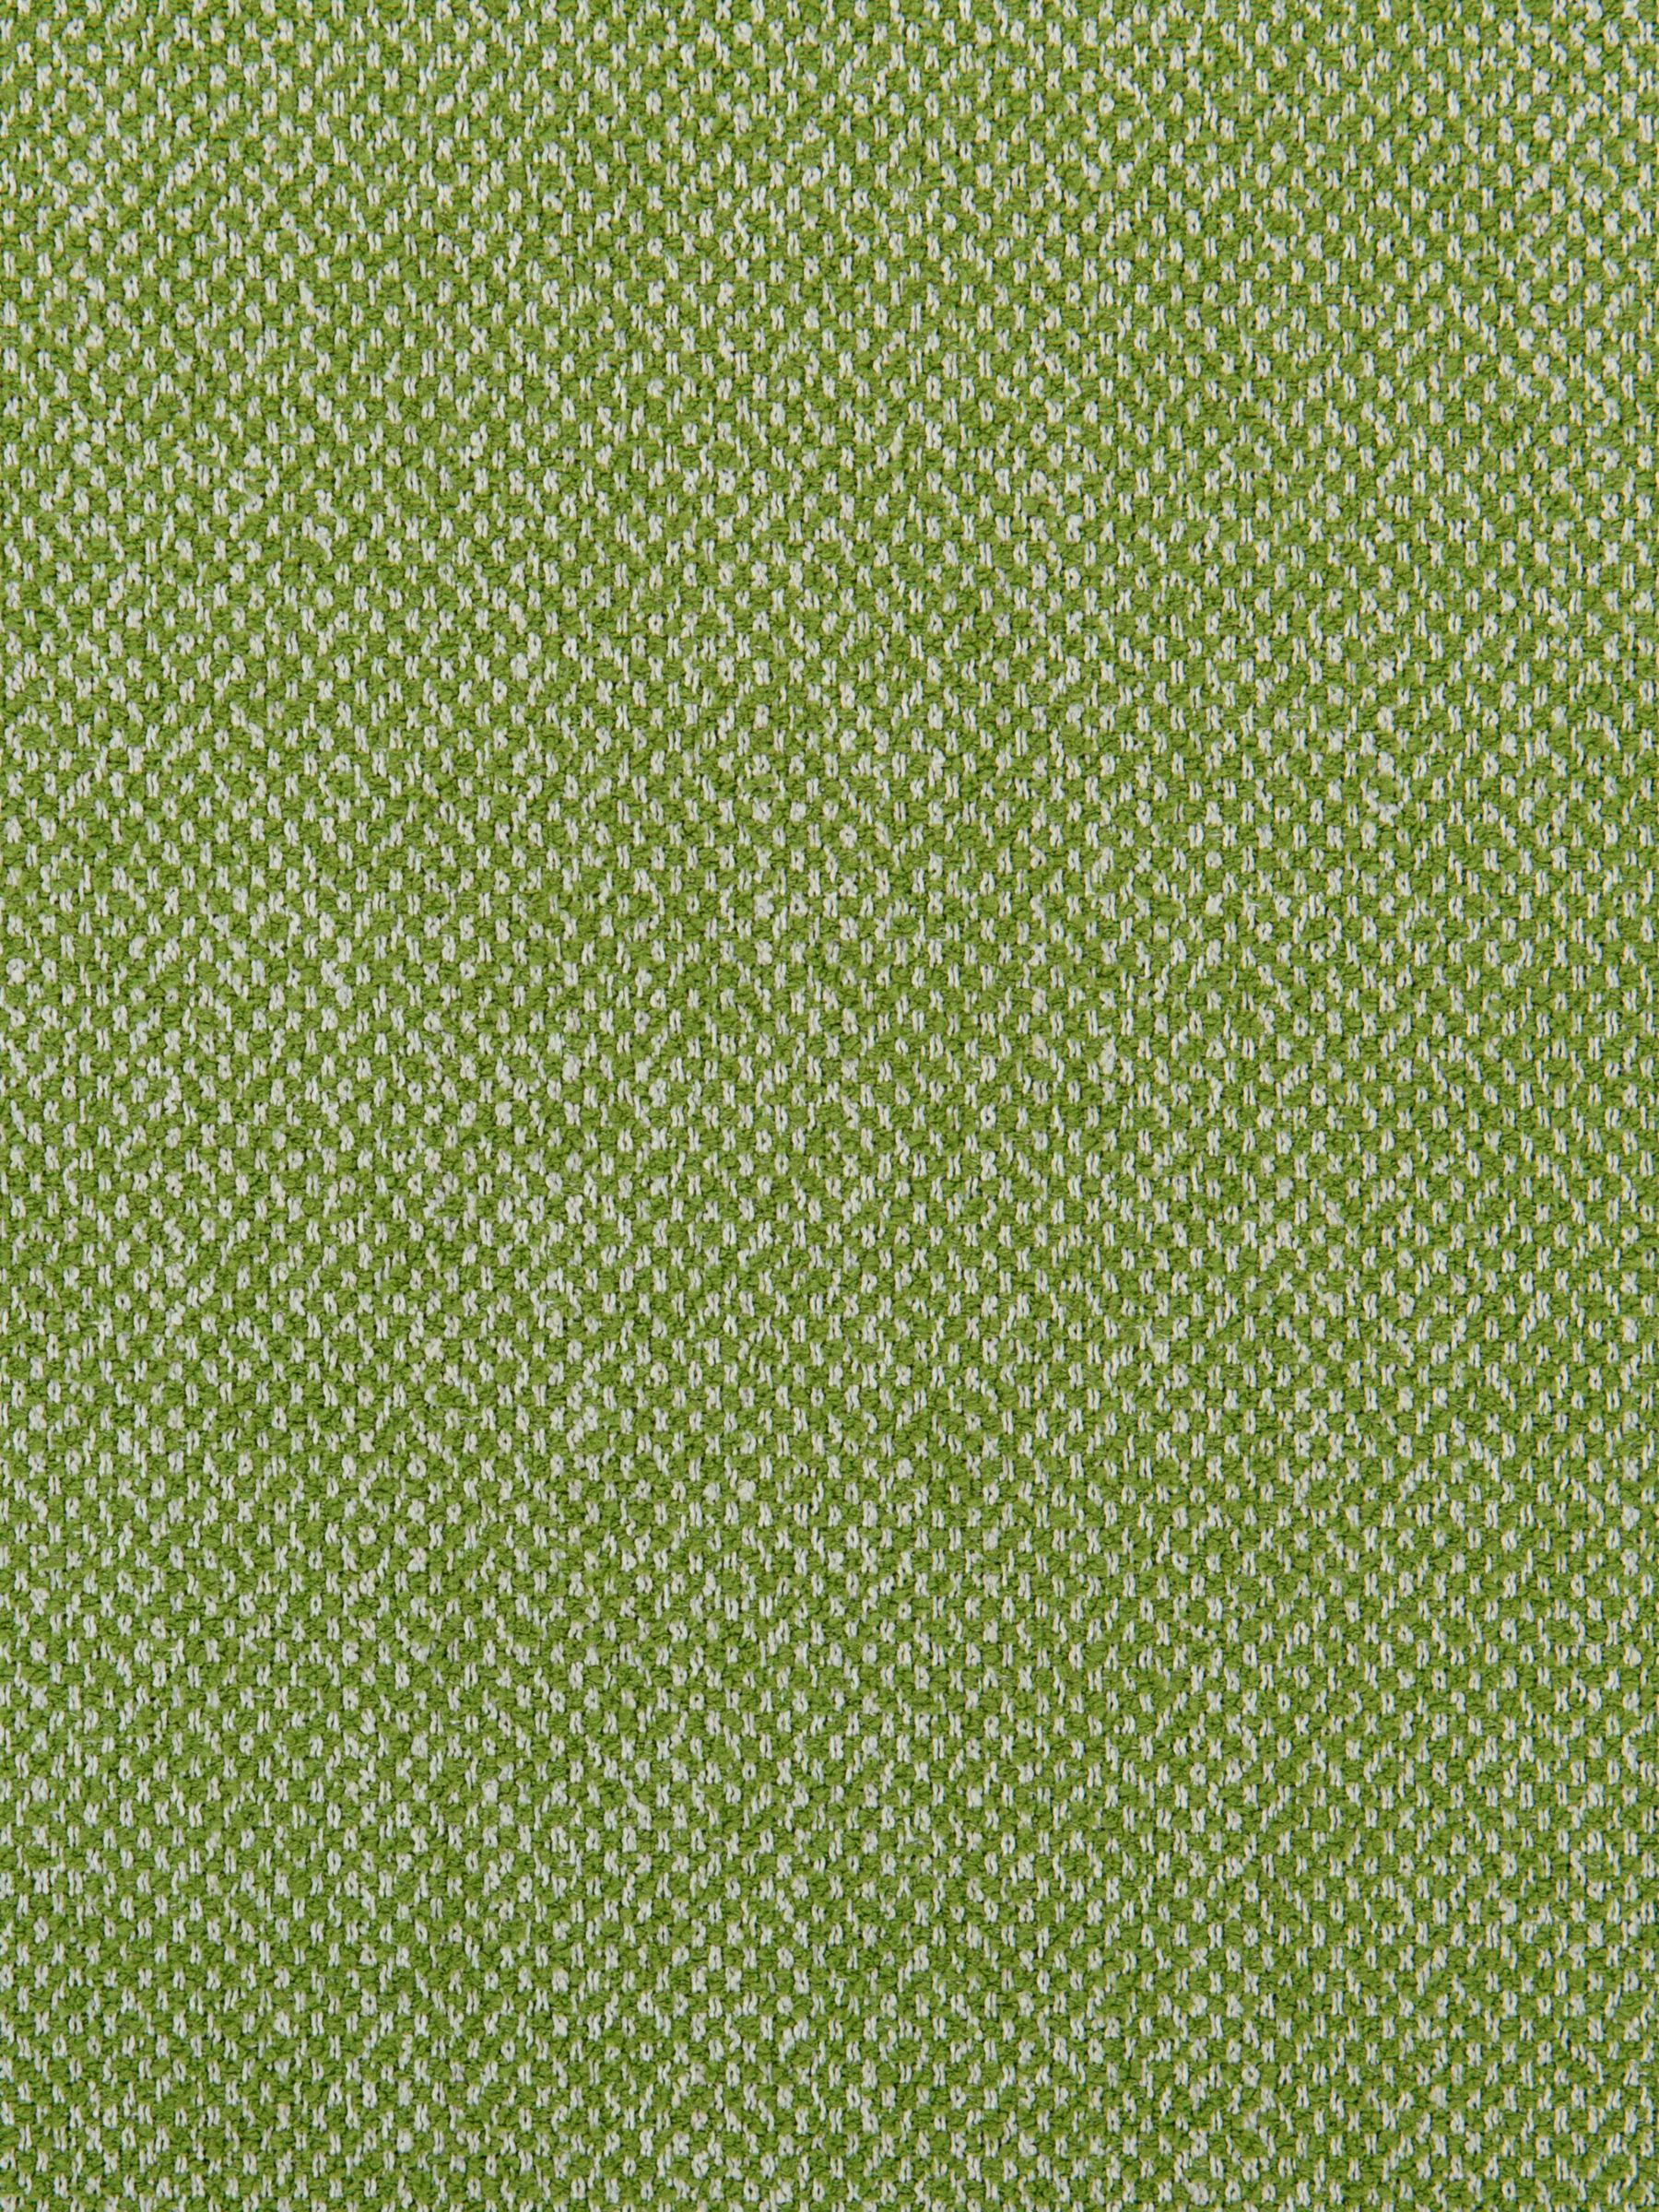 Designers Guild Soft Boucle Tweed Weave Furnishing Fabric, Grass